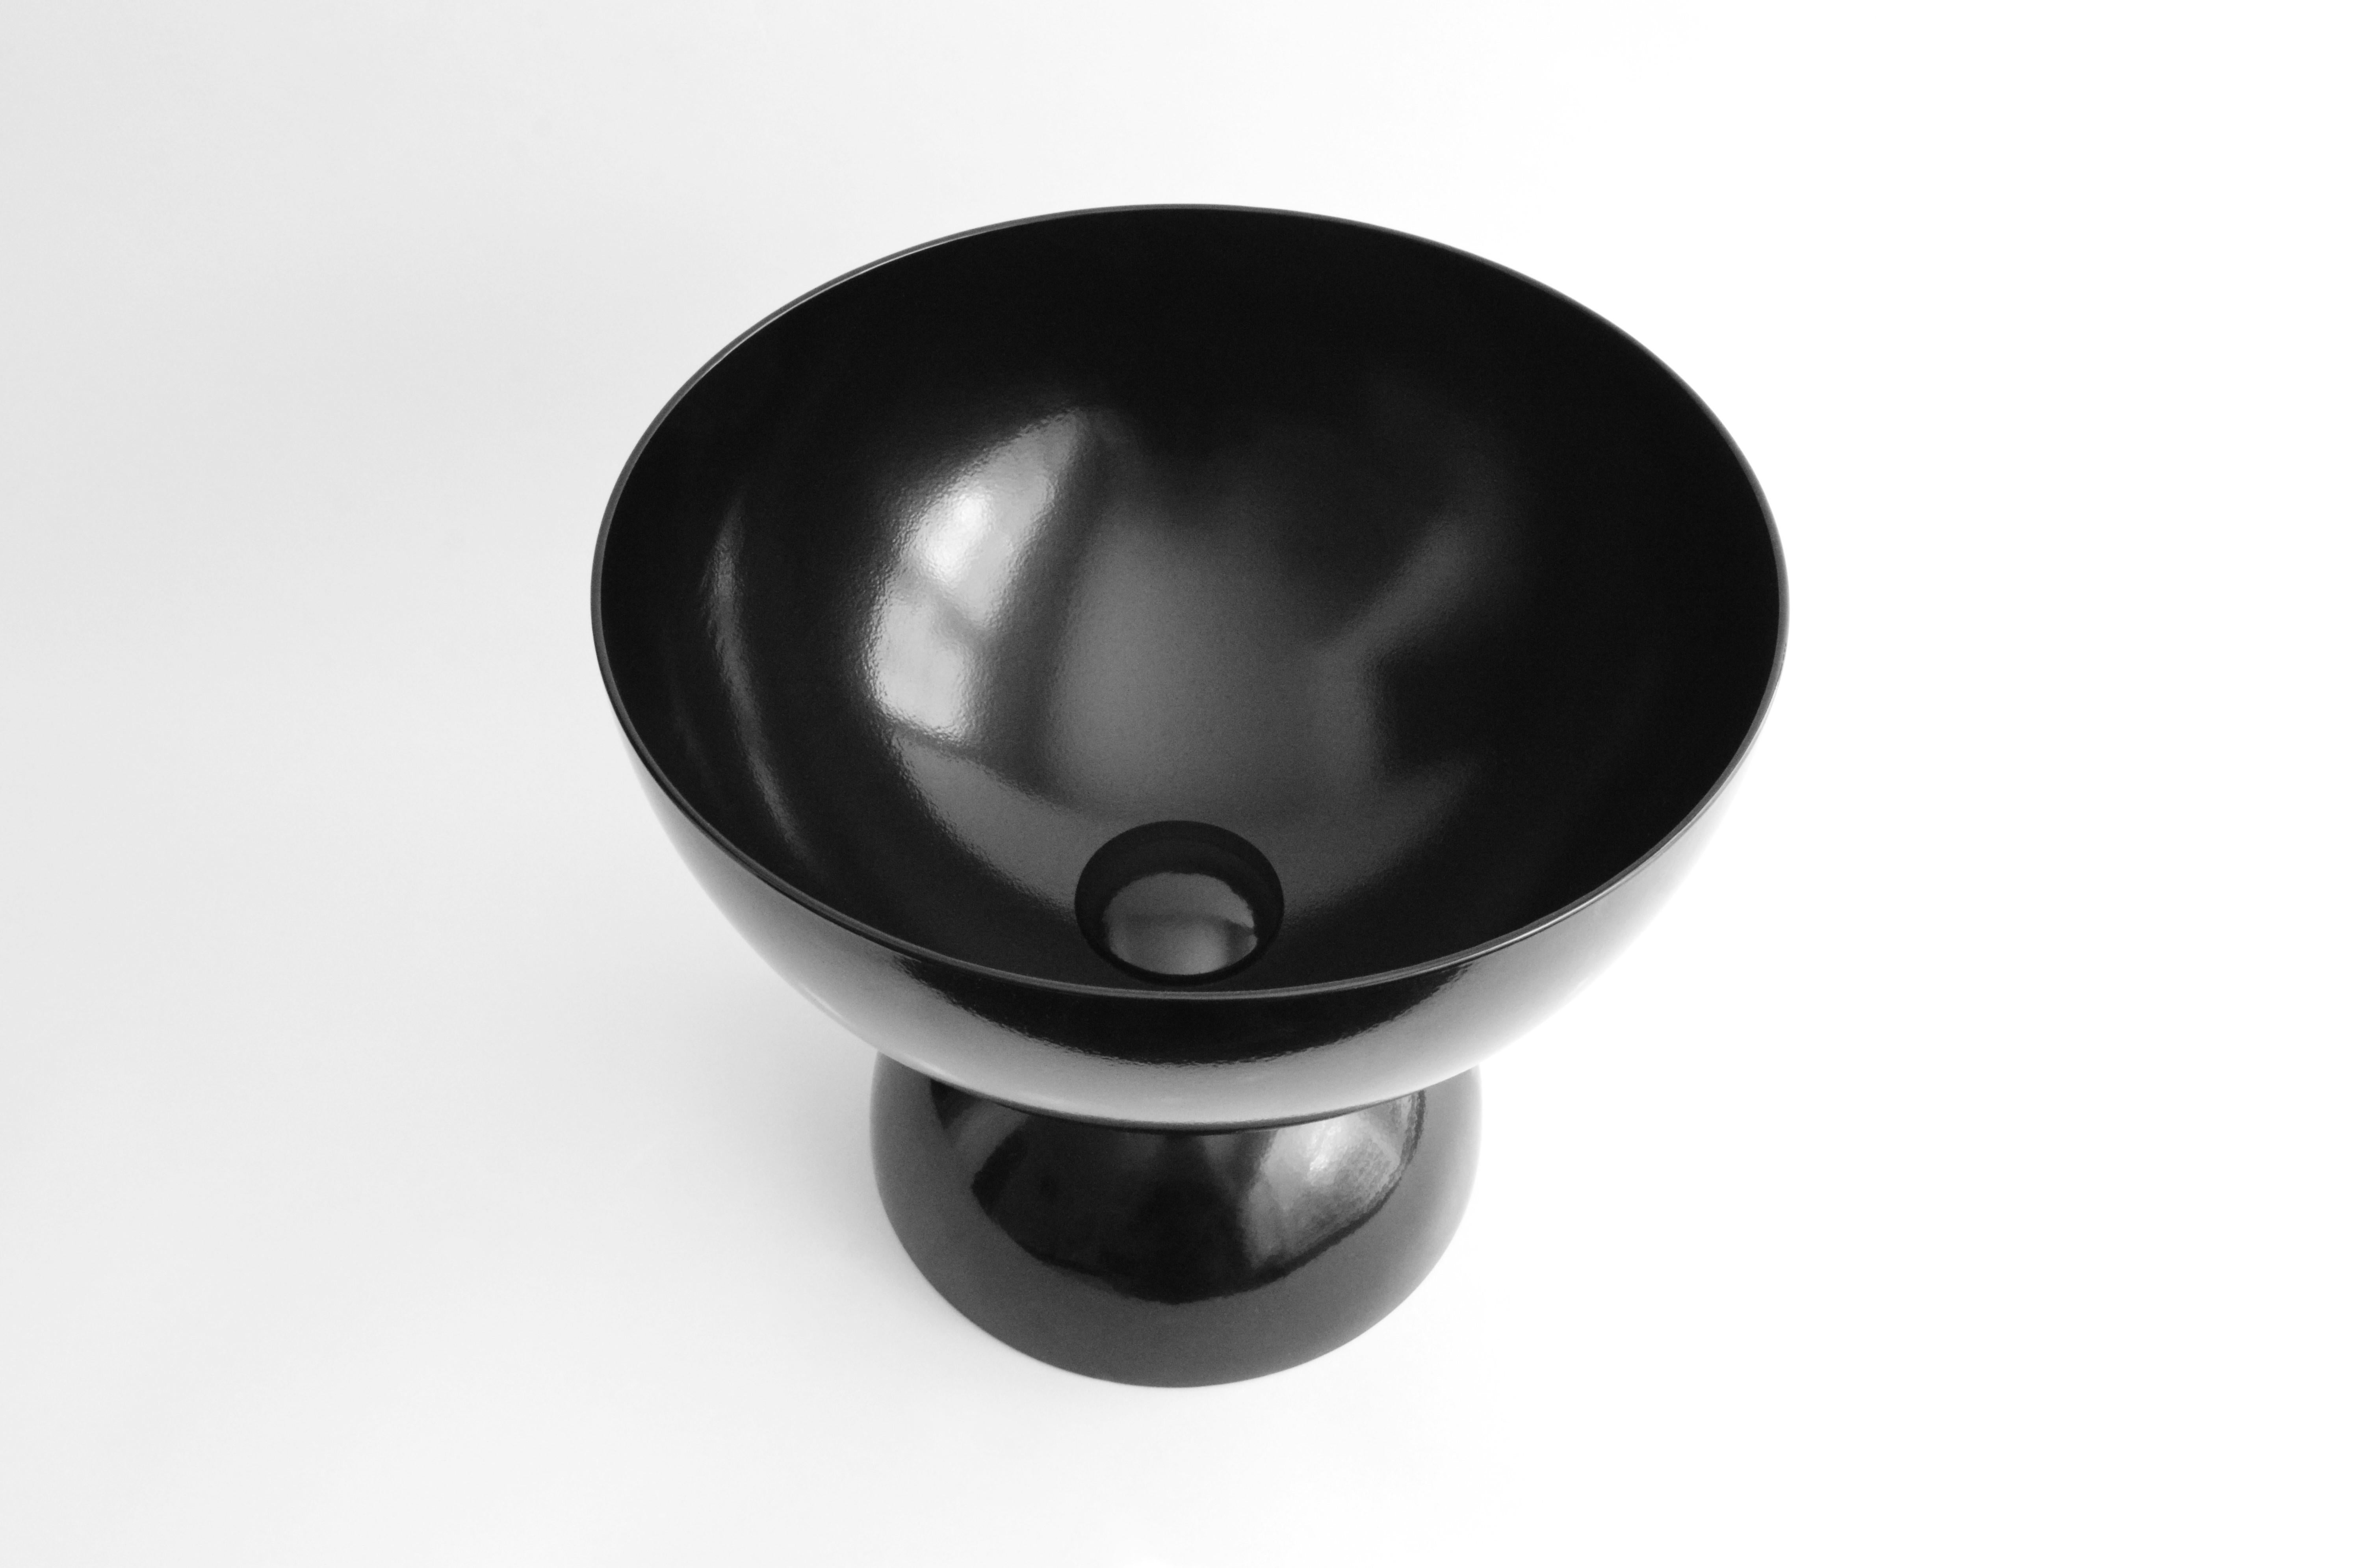 The Pluto Bowl combines contemporary design style with functionality, its simple sculptural form and heavy duty construction makes it an ideal vessel for decorative displays. Created using a large 30cm diameter hemisphere, the bowl has the capacity